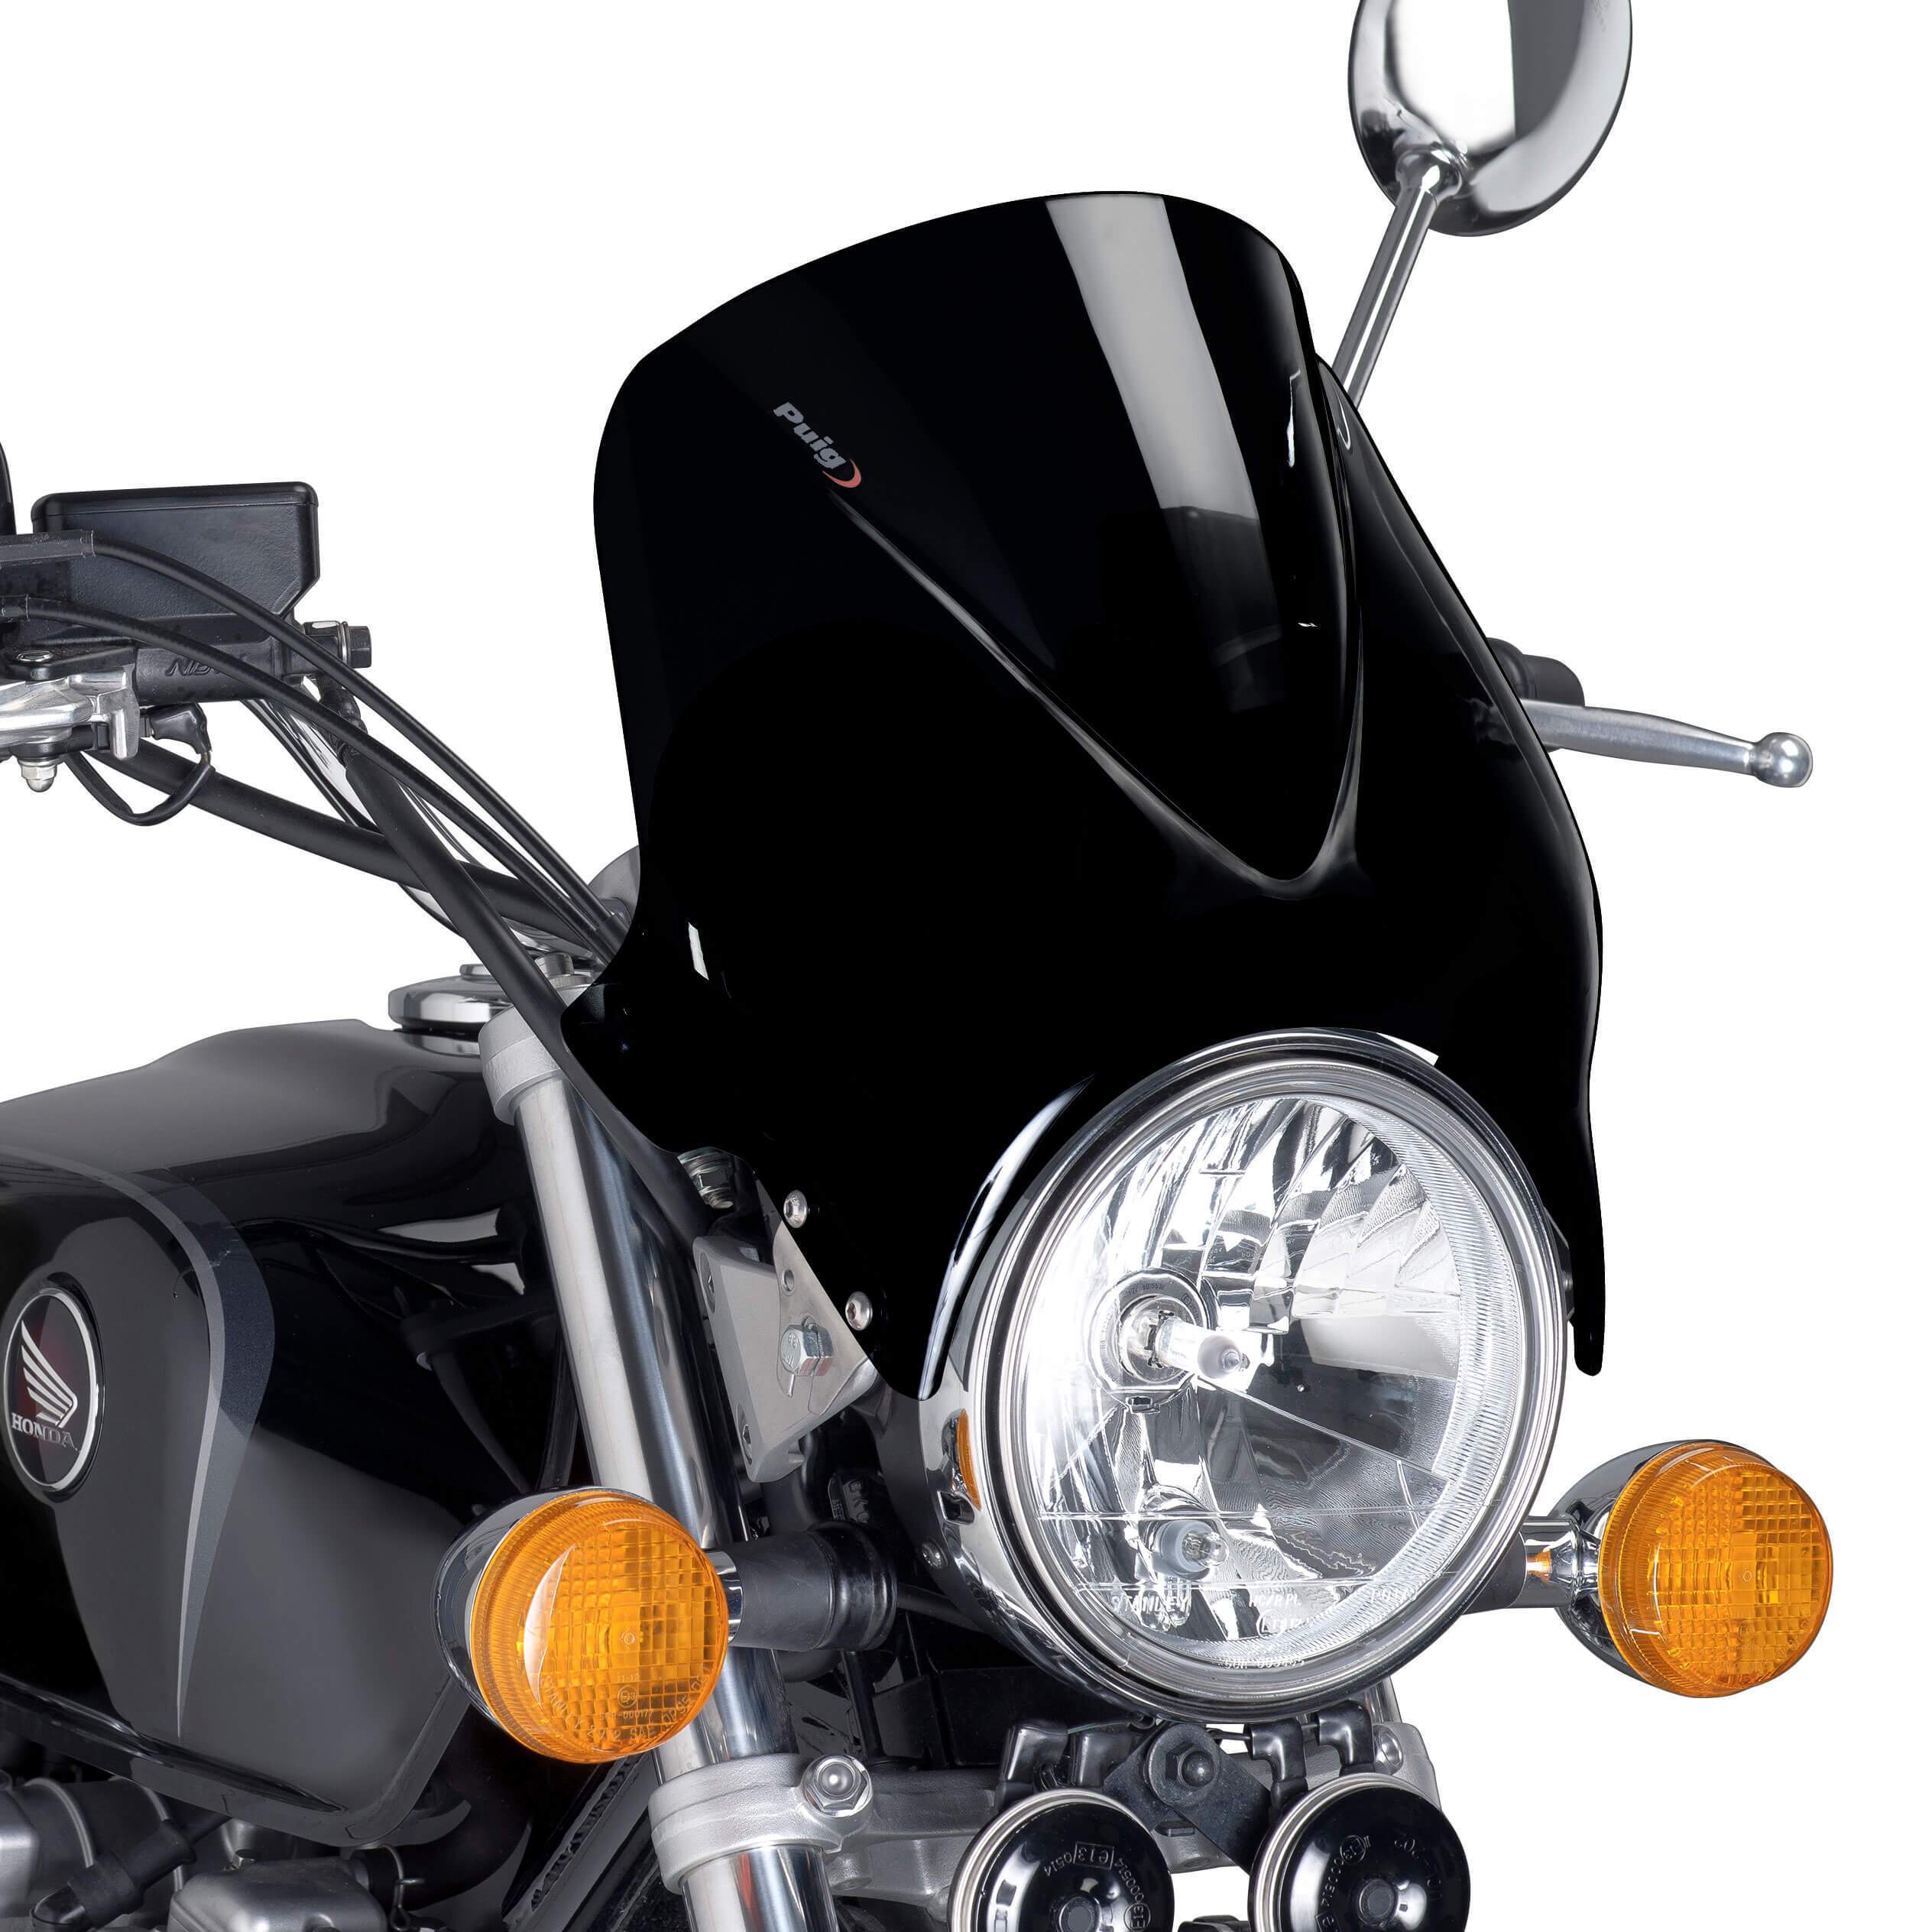 Puig Windy Screen | Black (Opaque) | Triumph Bonneville T100 2002>2019-M1482N-Screens-Pyramid Motorcycle Accessories